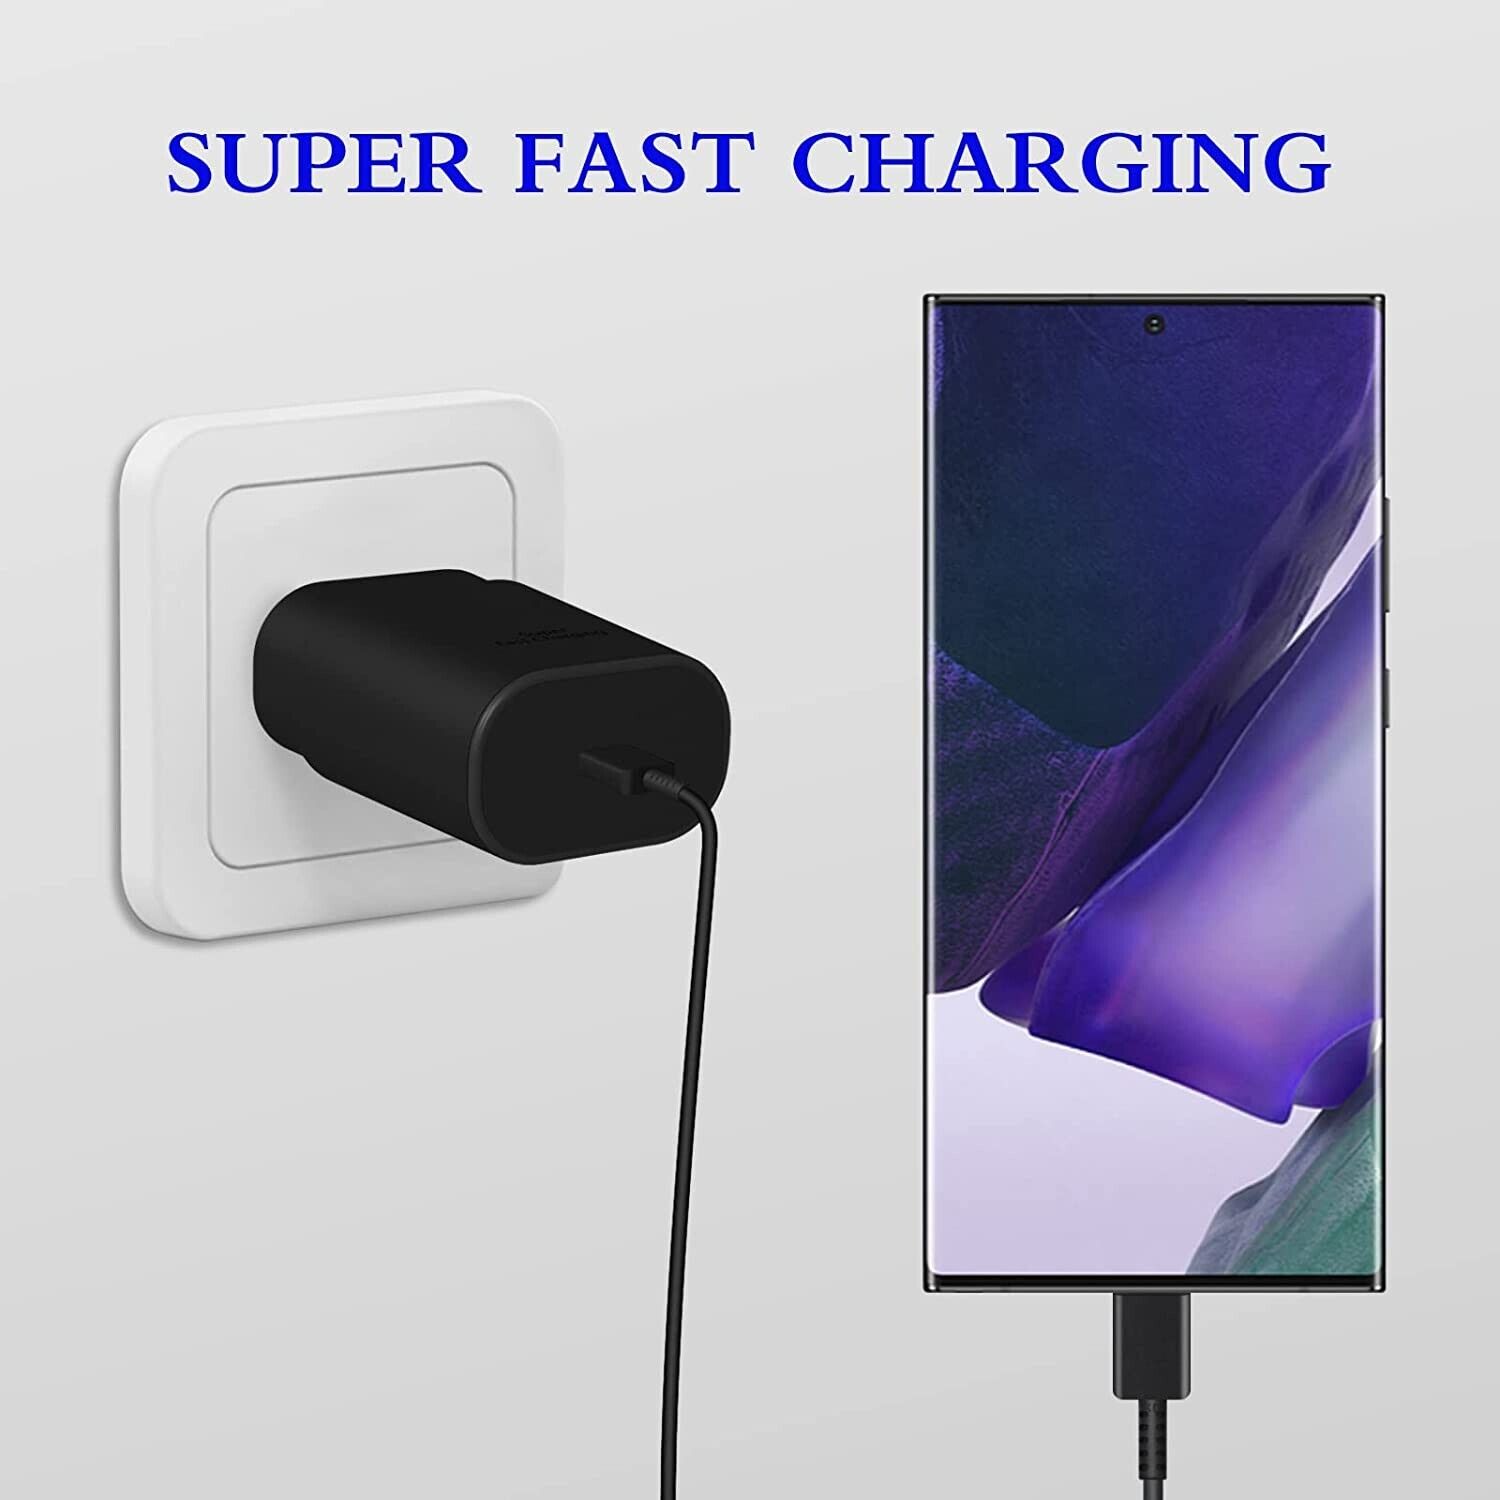 2x GENUINE 25 Watt SUPER Fast Wall Charger & USB-C Cable For Samsung S23 S22 S21 TCoology Quick Charge Rapid Charging, Galaxy S21 S21+ Ultra Plus 5G FE, Galaxy Note 10 10+ Ultra Plus 5G, Galaxy Note 20 20+ Ultra Plus 5G, Galaxy S20 S20+ Ultra 5G Ultra, LG V30 40 50 60 Stylo 4 5 6, Power Delivery PD, Galaxy A20 A21 A22 A50 A51 A52, LG V30 V40 V50 V60 Stylo 4 5 6, Galaxy Tab S3 S4 S5 S6 S7 Pro, Extra Long Charger Cord Wire Plug, Galaxy A70 A71 A32 S10 S10+ Plus, Galaxy S10e/S9/S9+/S8/S8+ Plus, 2020 2018 iPad Pro 11/12.9, Motorola Moto Edge Plus One Zoom, Moto G 5G Plus Hyper One Vision G8 G9, Galaxy A90 A91 A92 A72 S8 S9 Plus, Galaxy Note 8 9 Tab S8 Pro - фотография #2